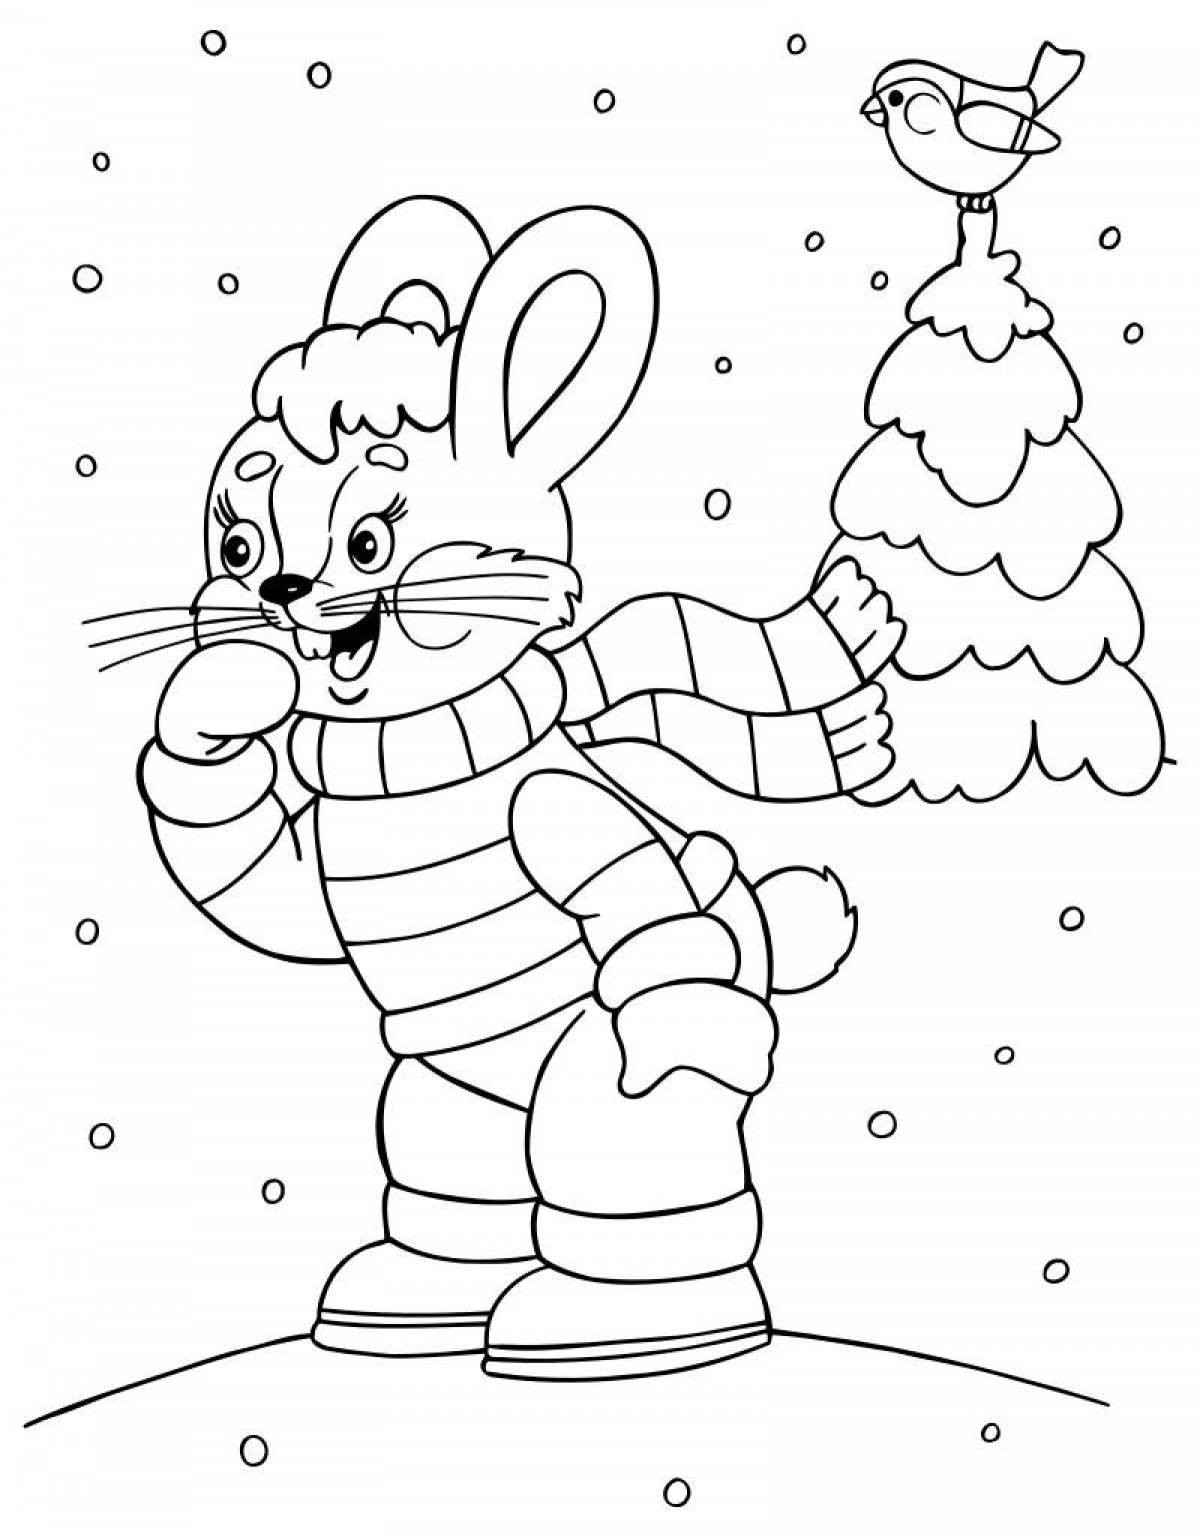 Glamor coloring winter for children 5-6 years old